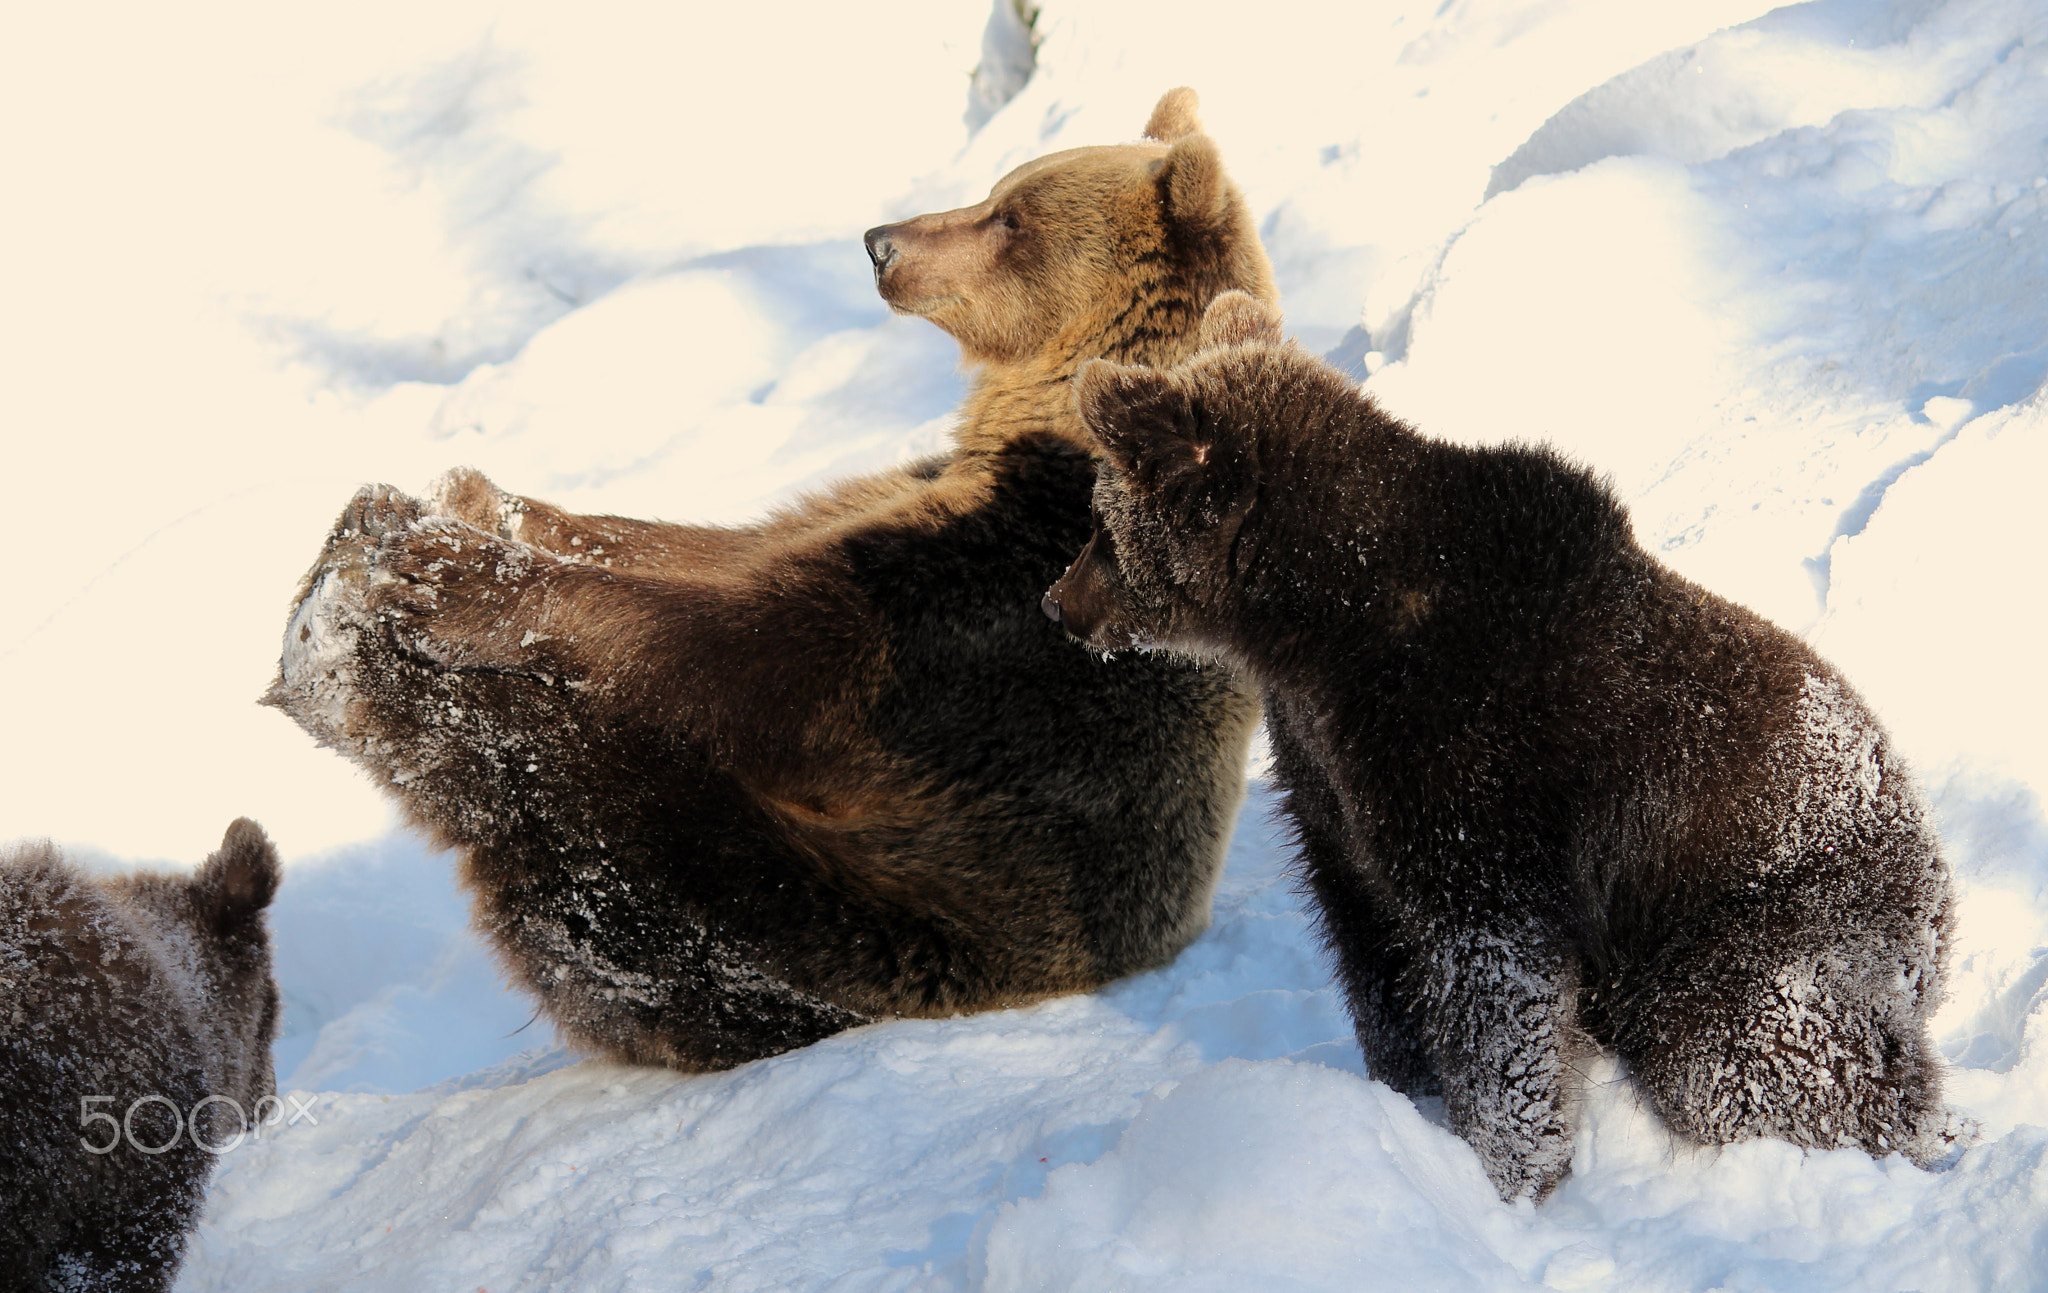 The bear mother and puppies in winter games.